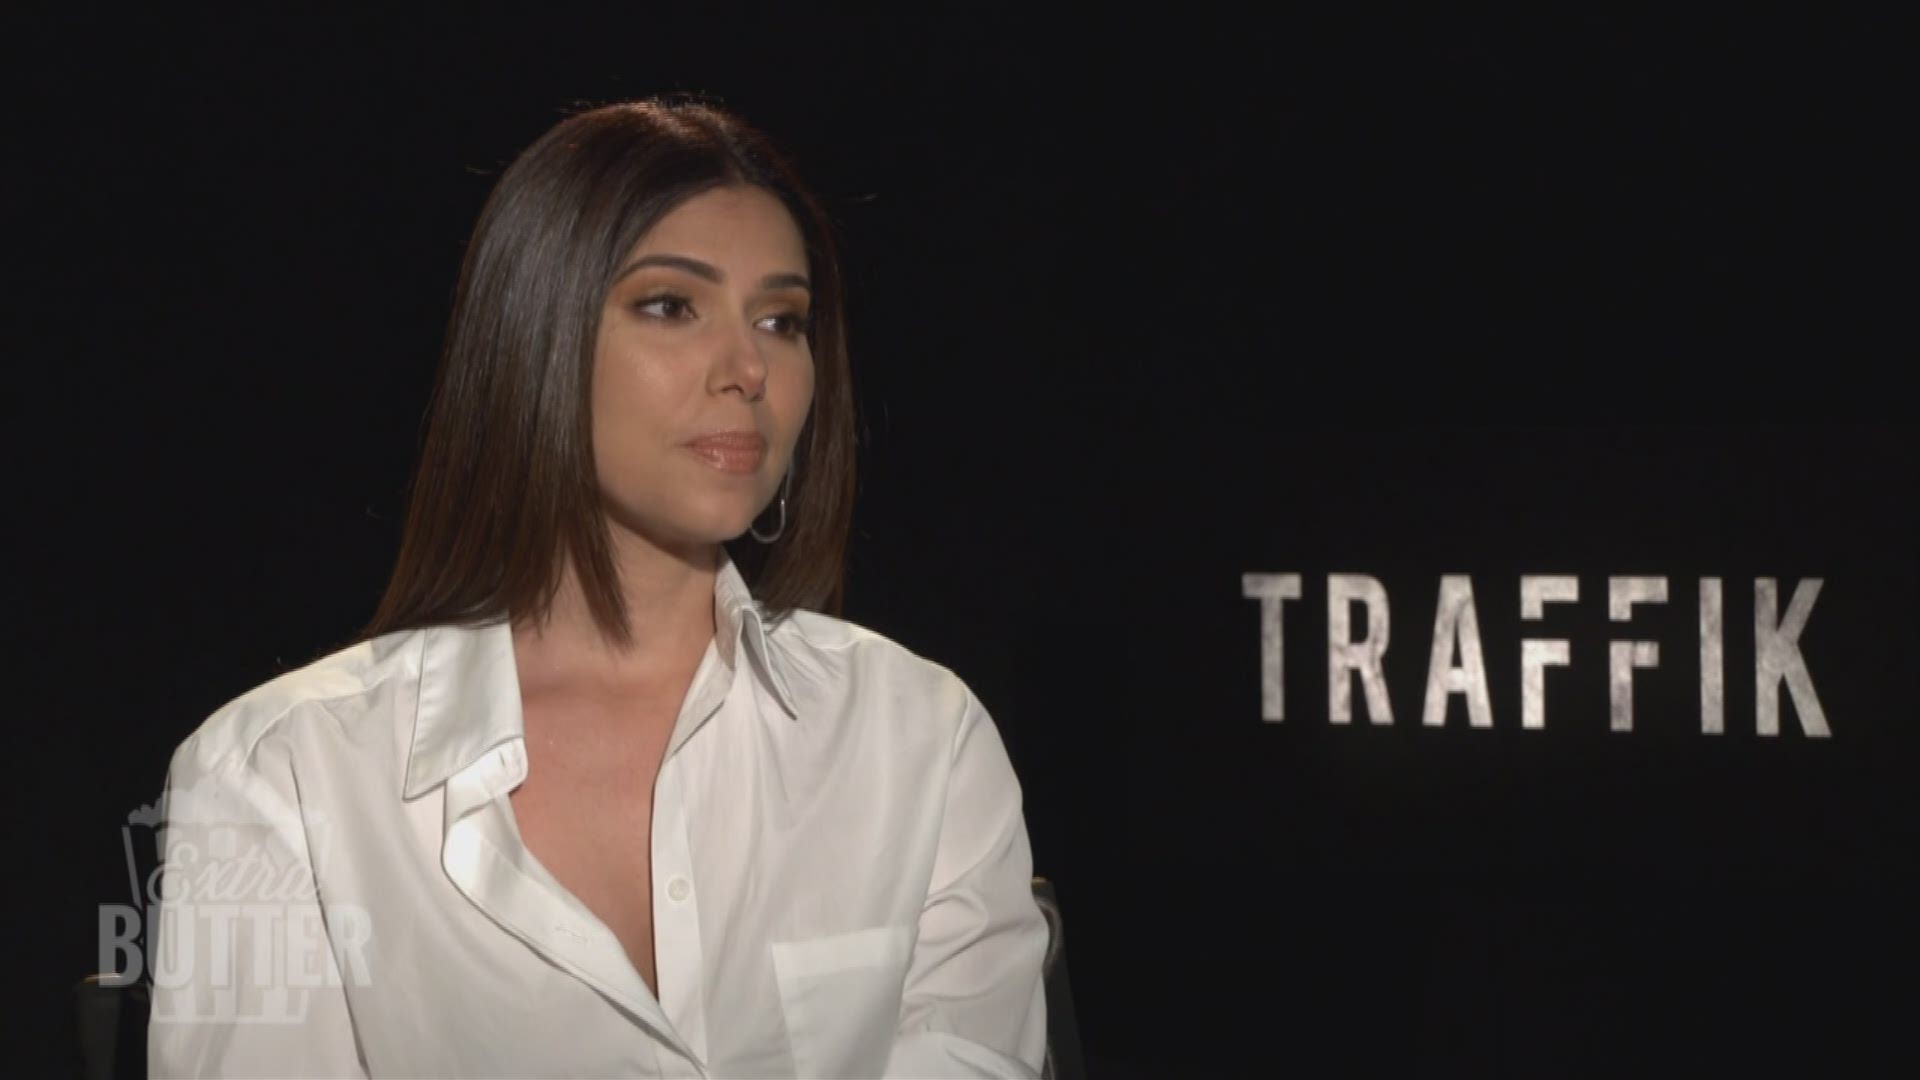 Roselyn Sanchez talks about real world human trafficking, the dark theme in the new film 'Traffik'. (Travel and accommodations paid for by Codeblack Films)